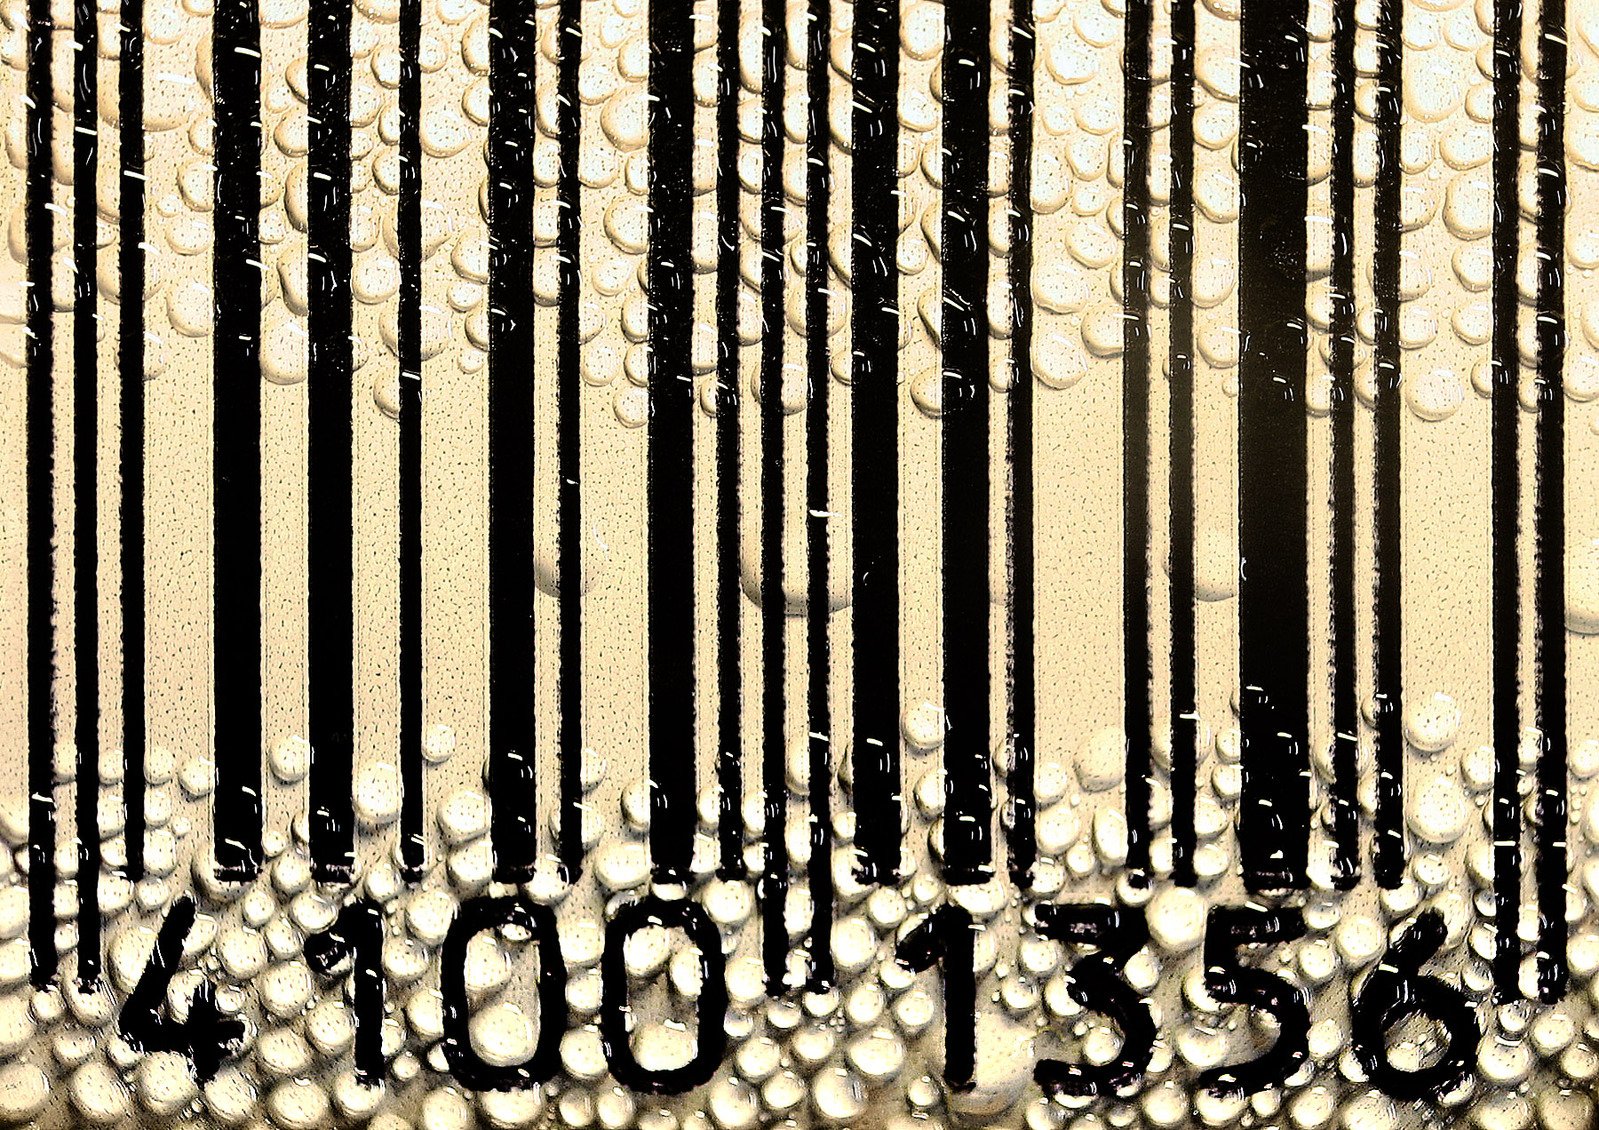 a barcode covered in water drops on the ground